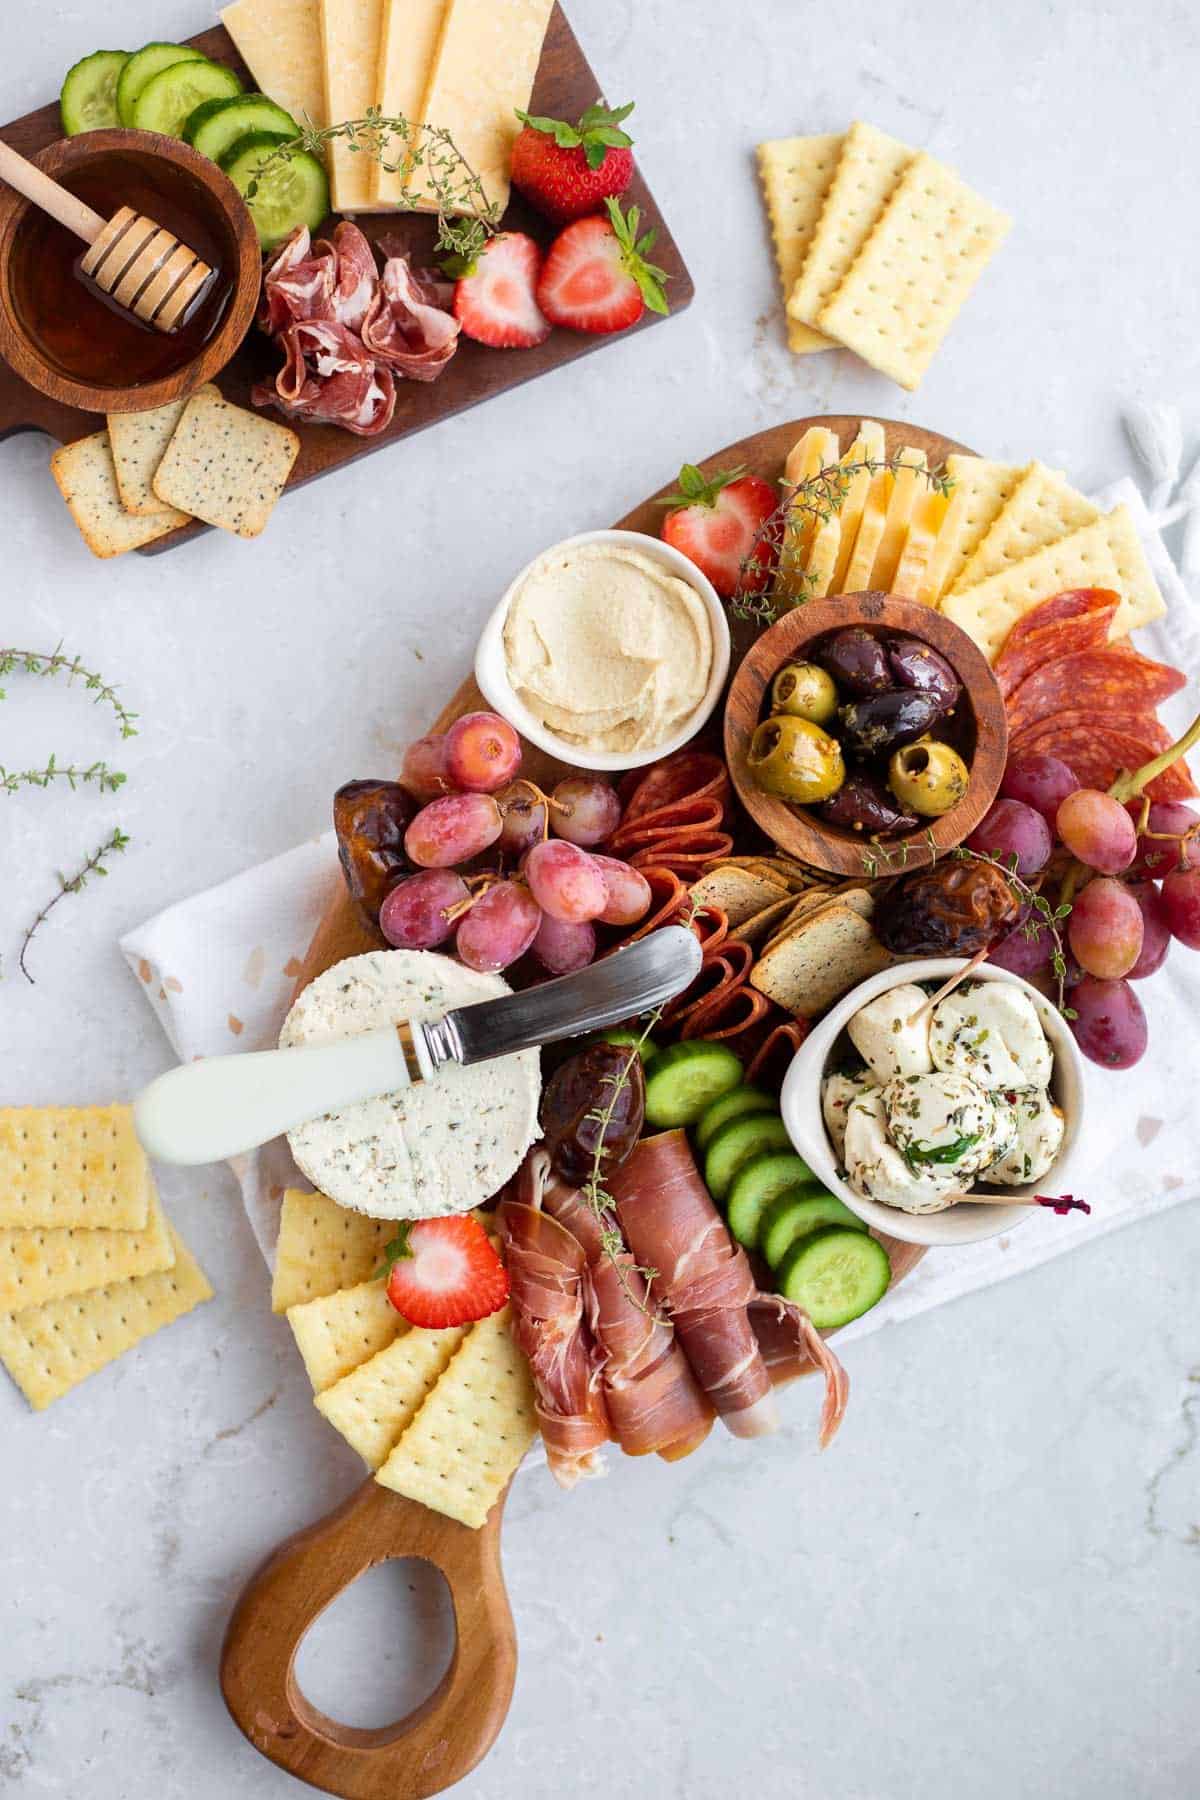 small charcuterie board full of meats, cheese, and vegetables on a white backdrop.